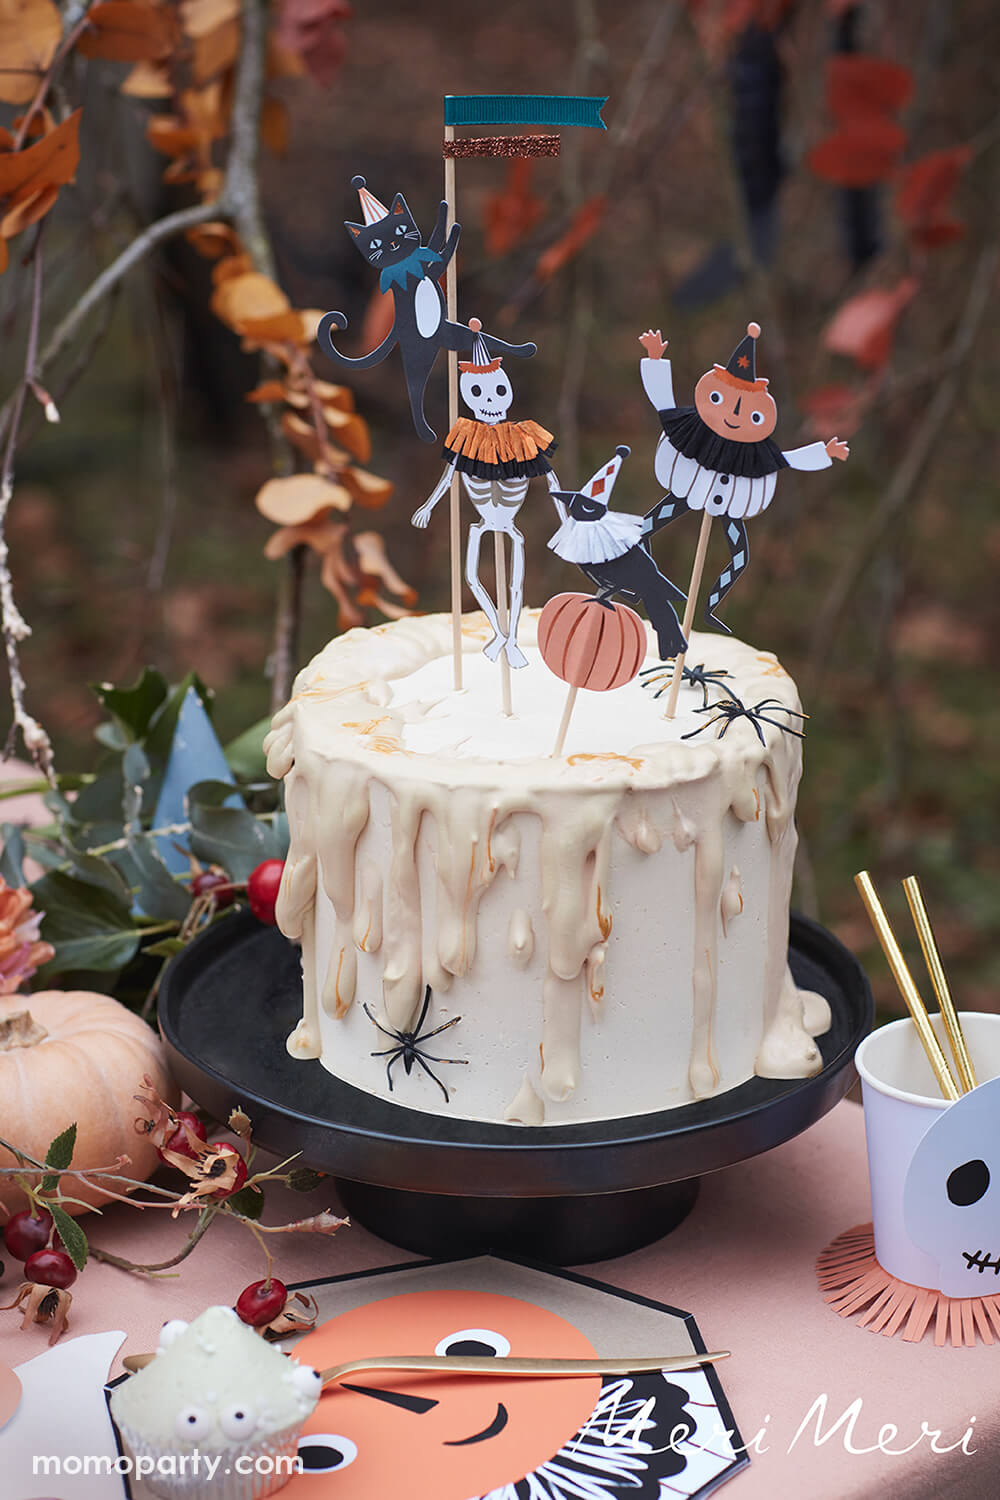 Classic Spooky Halloween party cake decorated with Meri Meri Vintage Halloween Cake Toppers, in pumpkin, crow, black cat and skeleton designs. Featuring ruffles around their necks made from crepe paper, and a spider decoration in the side of the cake. There are Vintage Halloween Side Plates with cupcakes on it, a vintage cups in skull design with gold straws on the table. inspiration from the roaring ‘20s to create a decadent new collection, this vintage halloween collection are perfect for halloween party